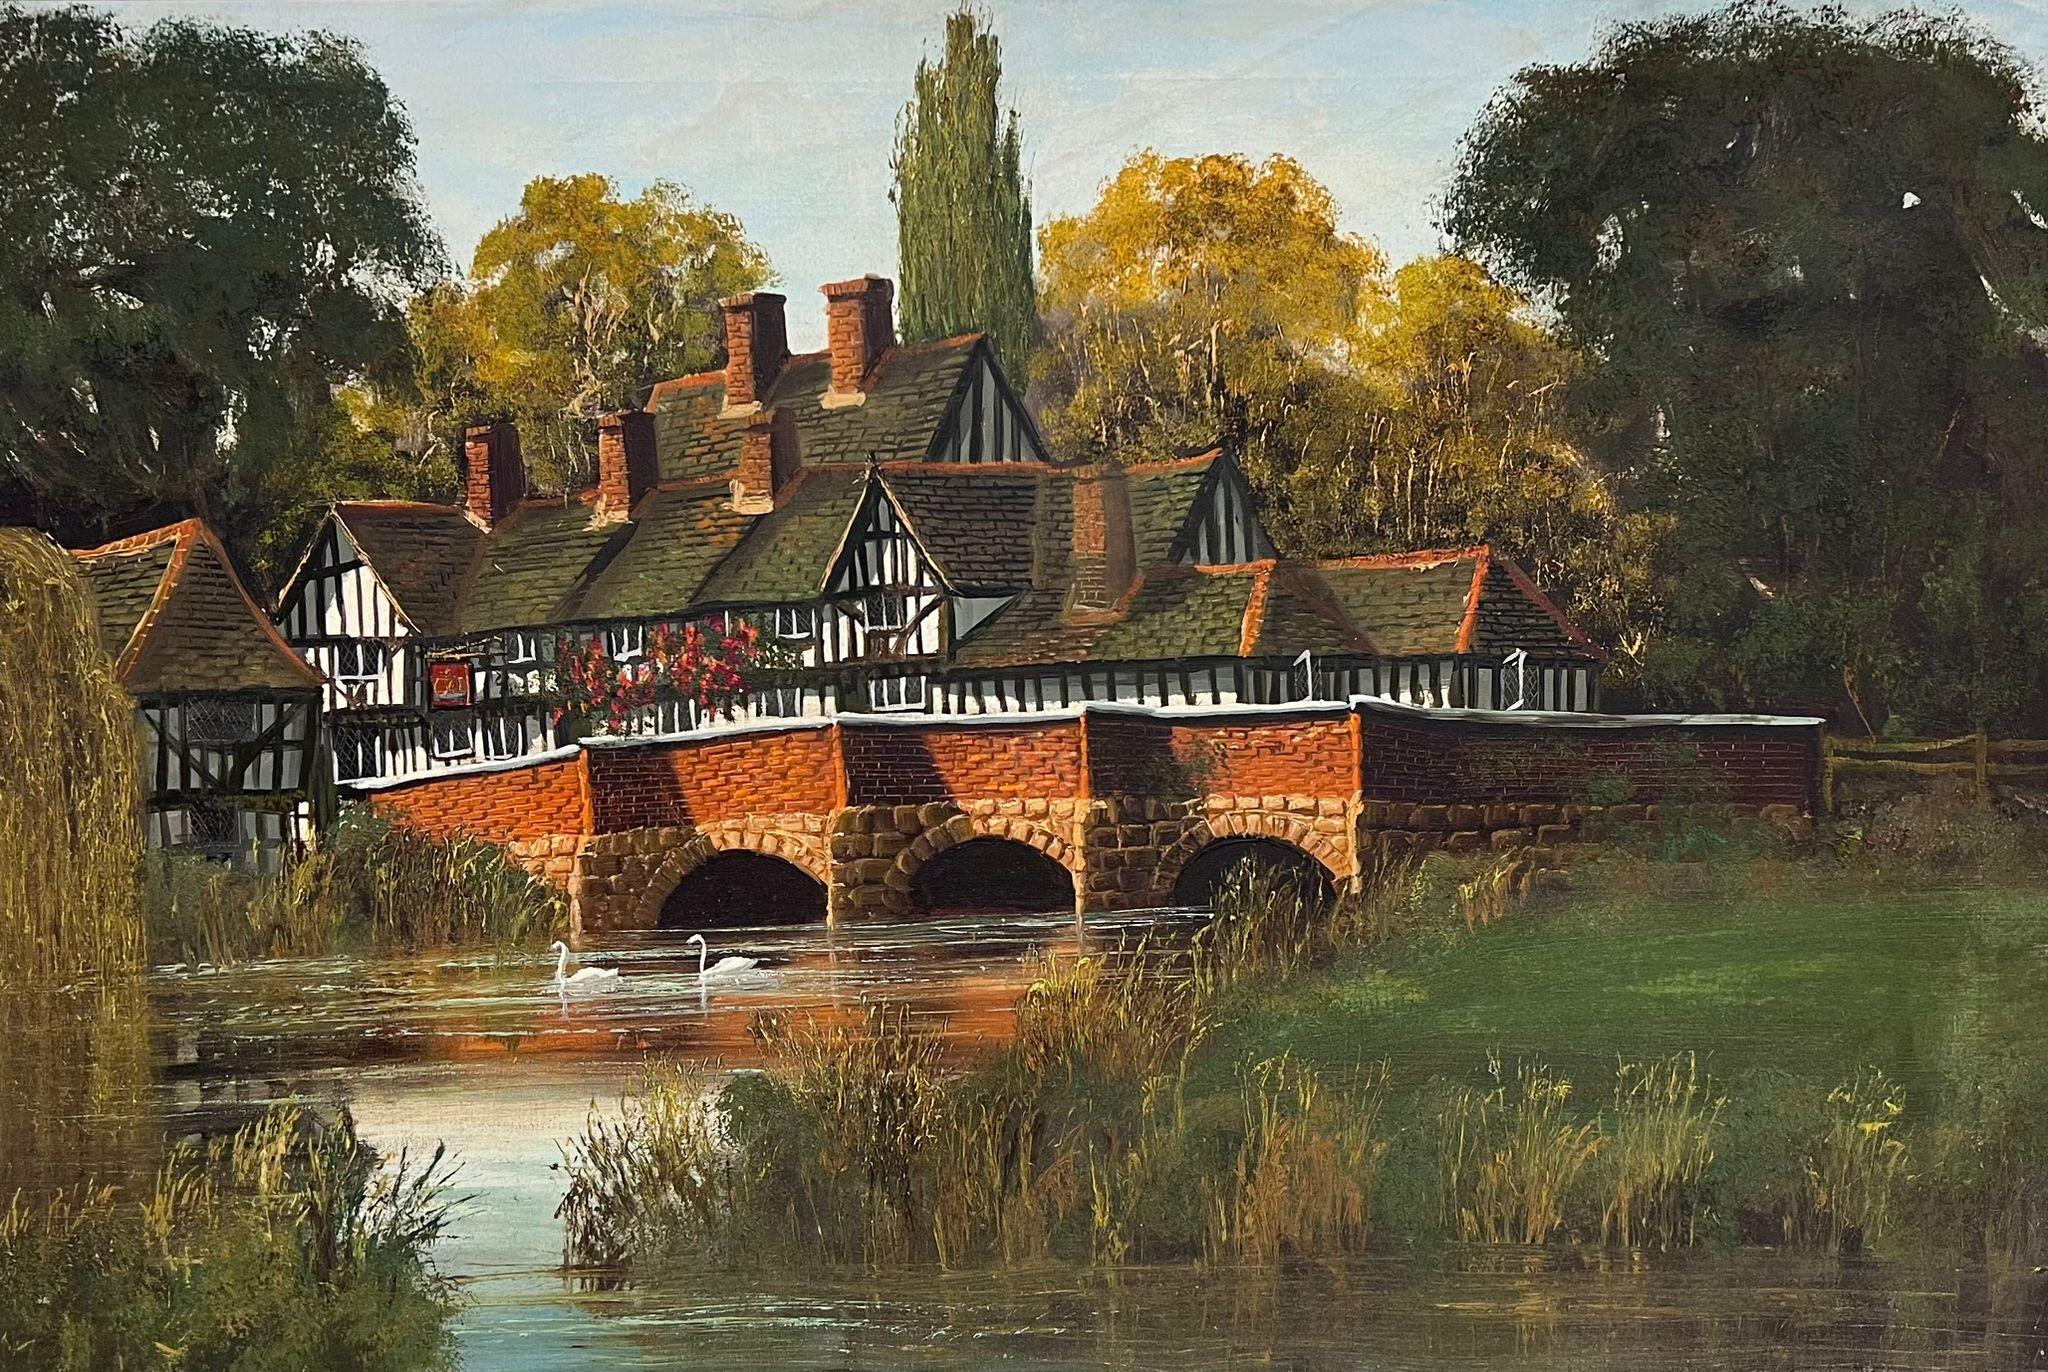 British School Landscape Painting - Large Old Tudor Coaching Inn by River Landscape & Swans Very Large English Oil